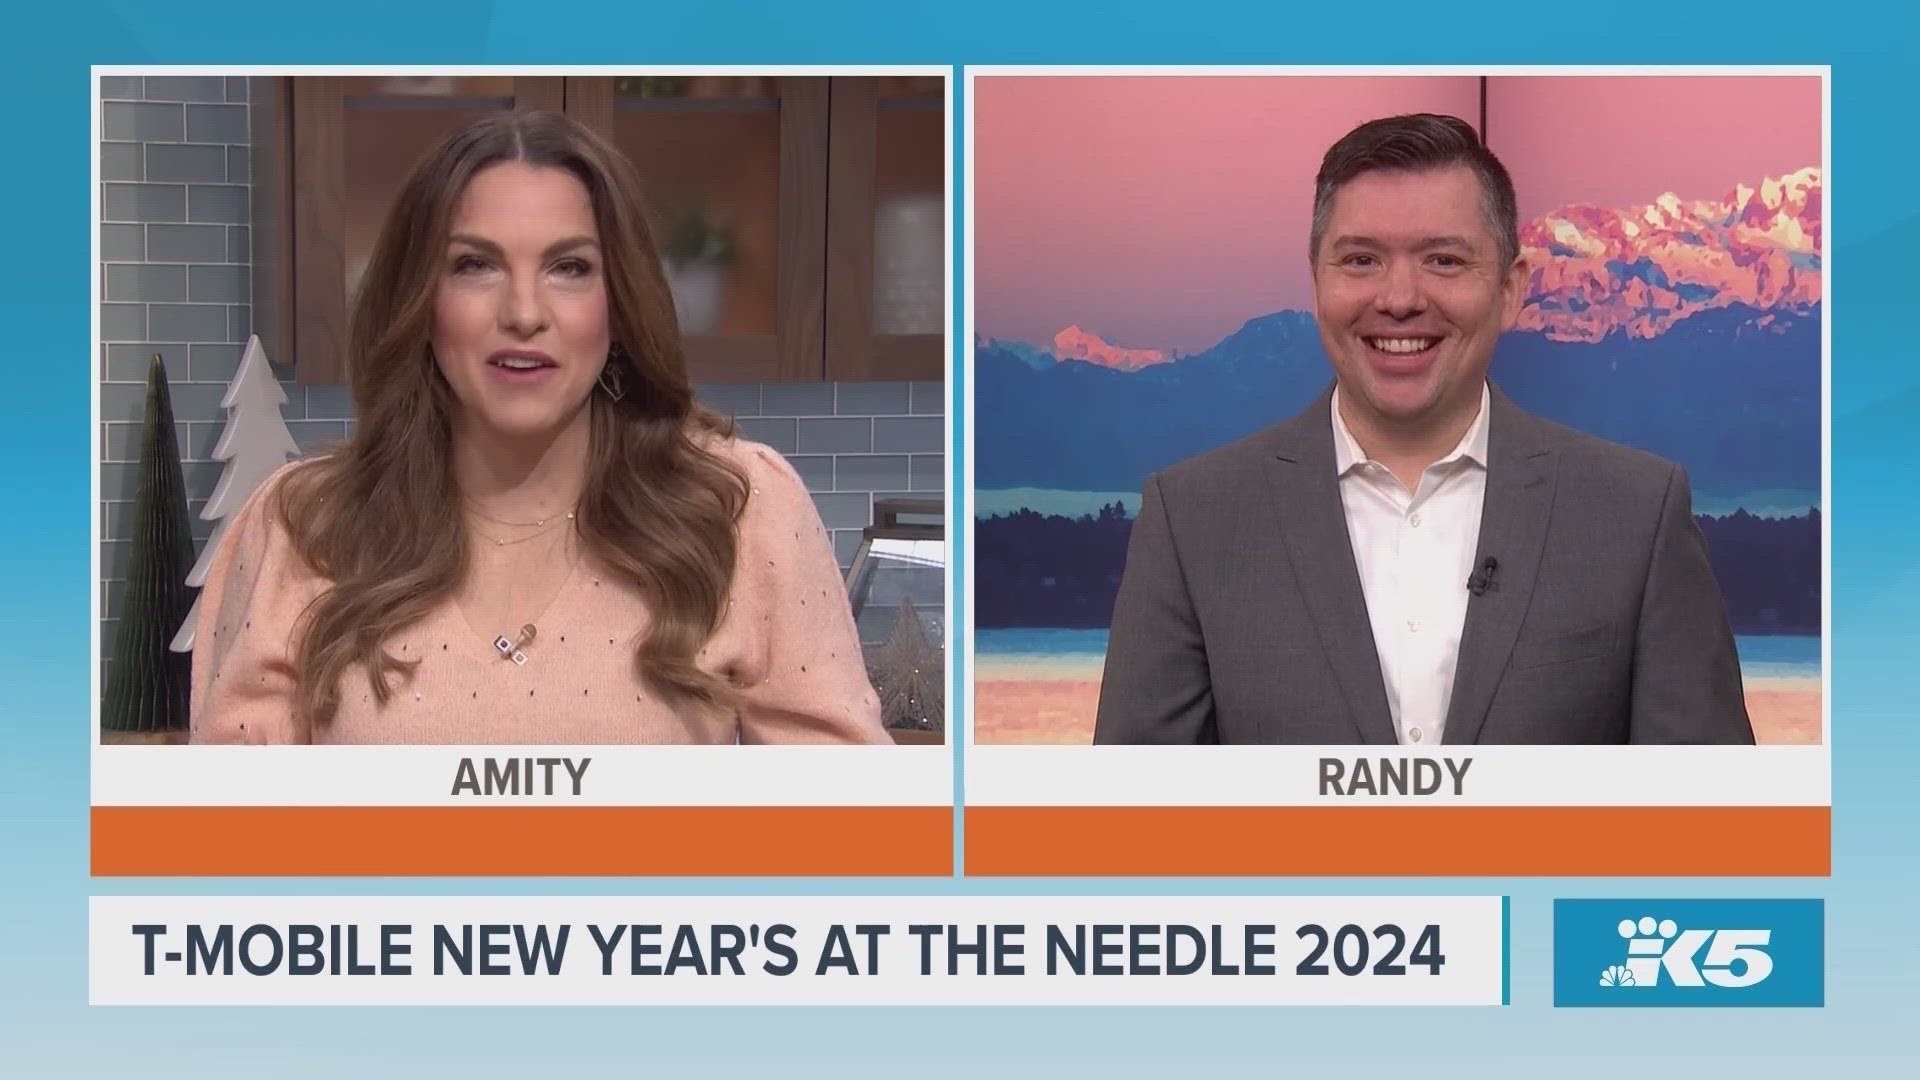 Amity is co-hosting New Year's at the Needle this year with Evening's Jim Dever and talks about what to look forward to with Randy Cote.